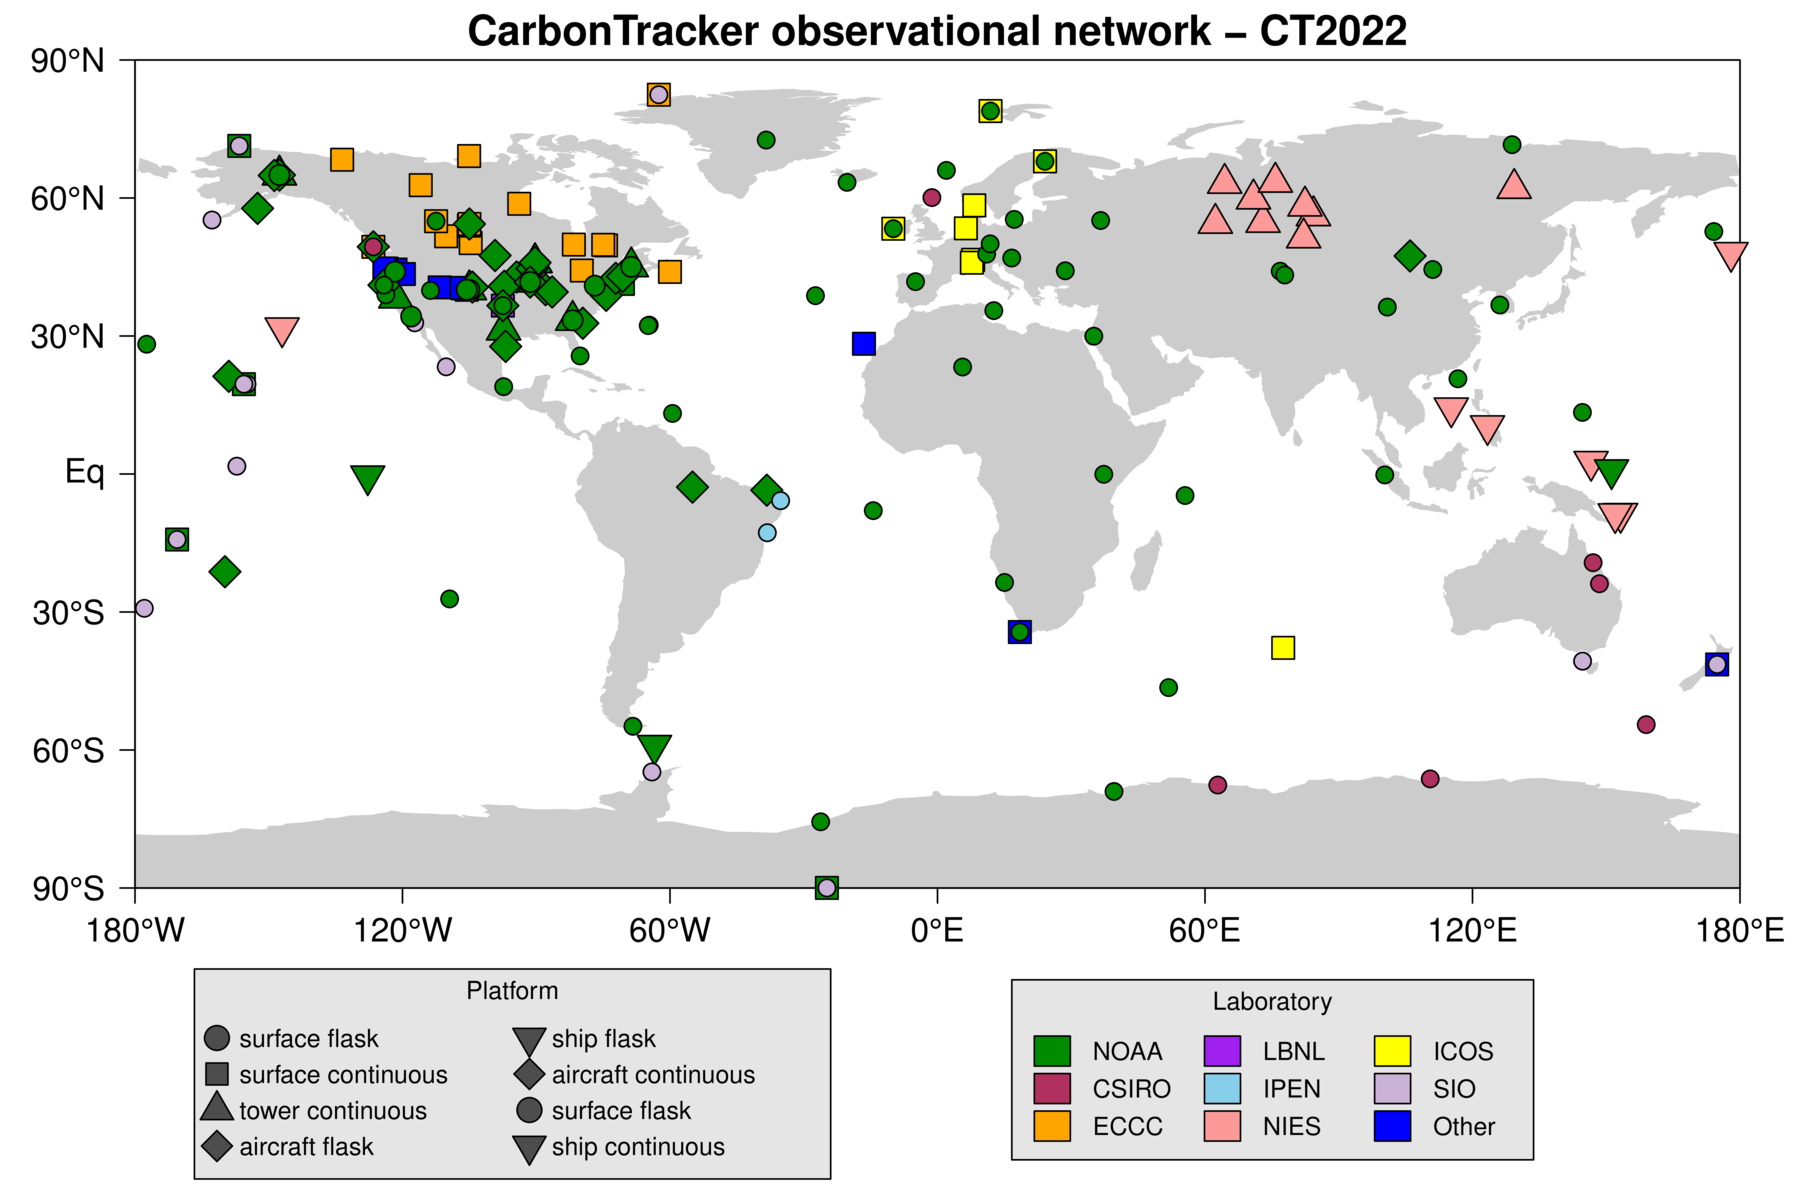 /webdata/ccgg/CT2022/summary/network-global.png